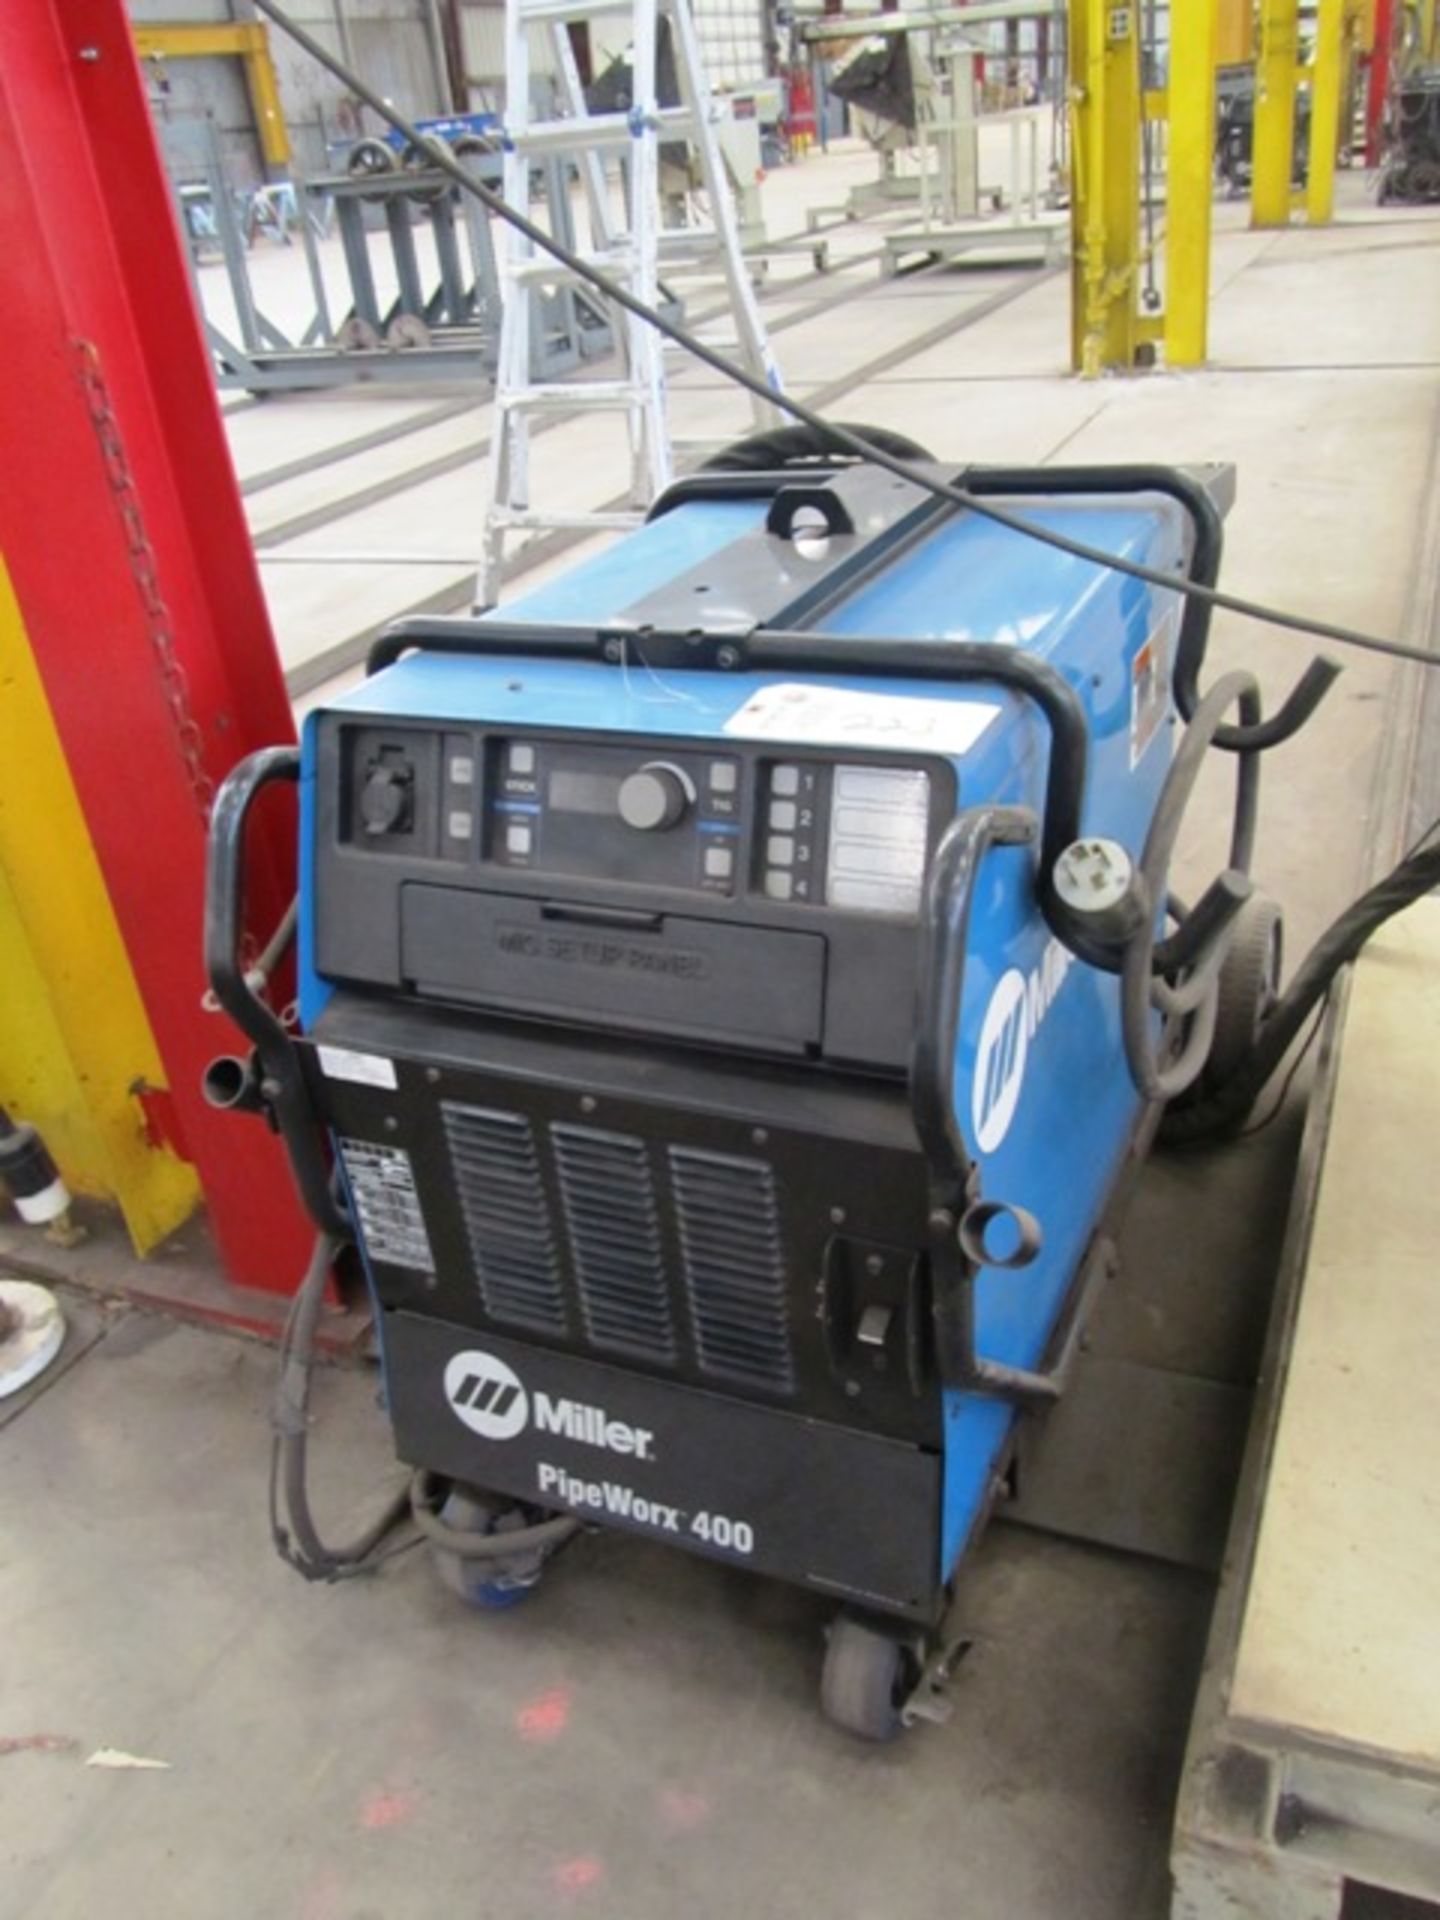 Miller PipeWorx 400 Portable Mig Welder with Miller PipeWorx Dual Wire Feeder, sn:MD130010G